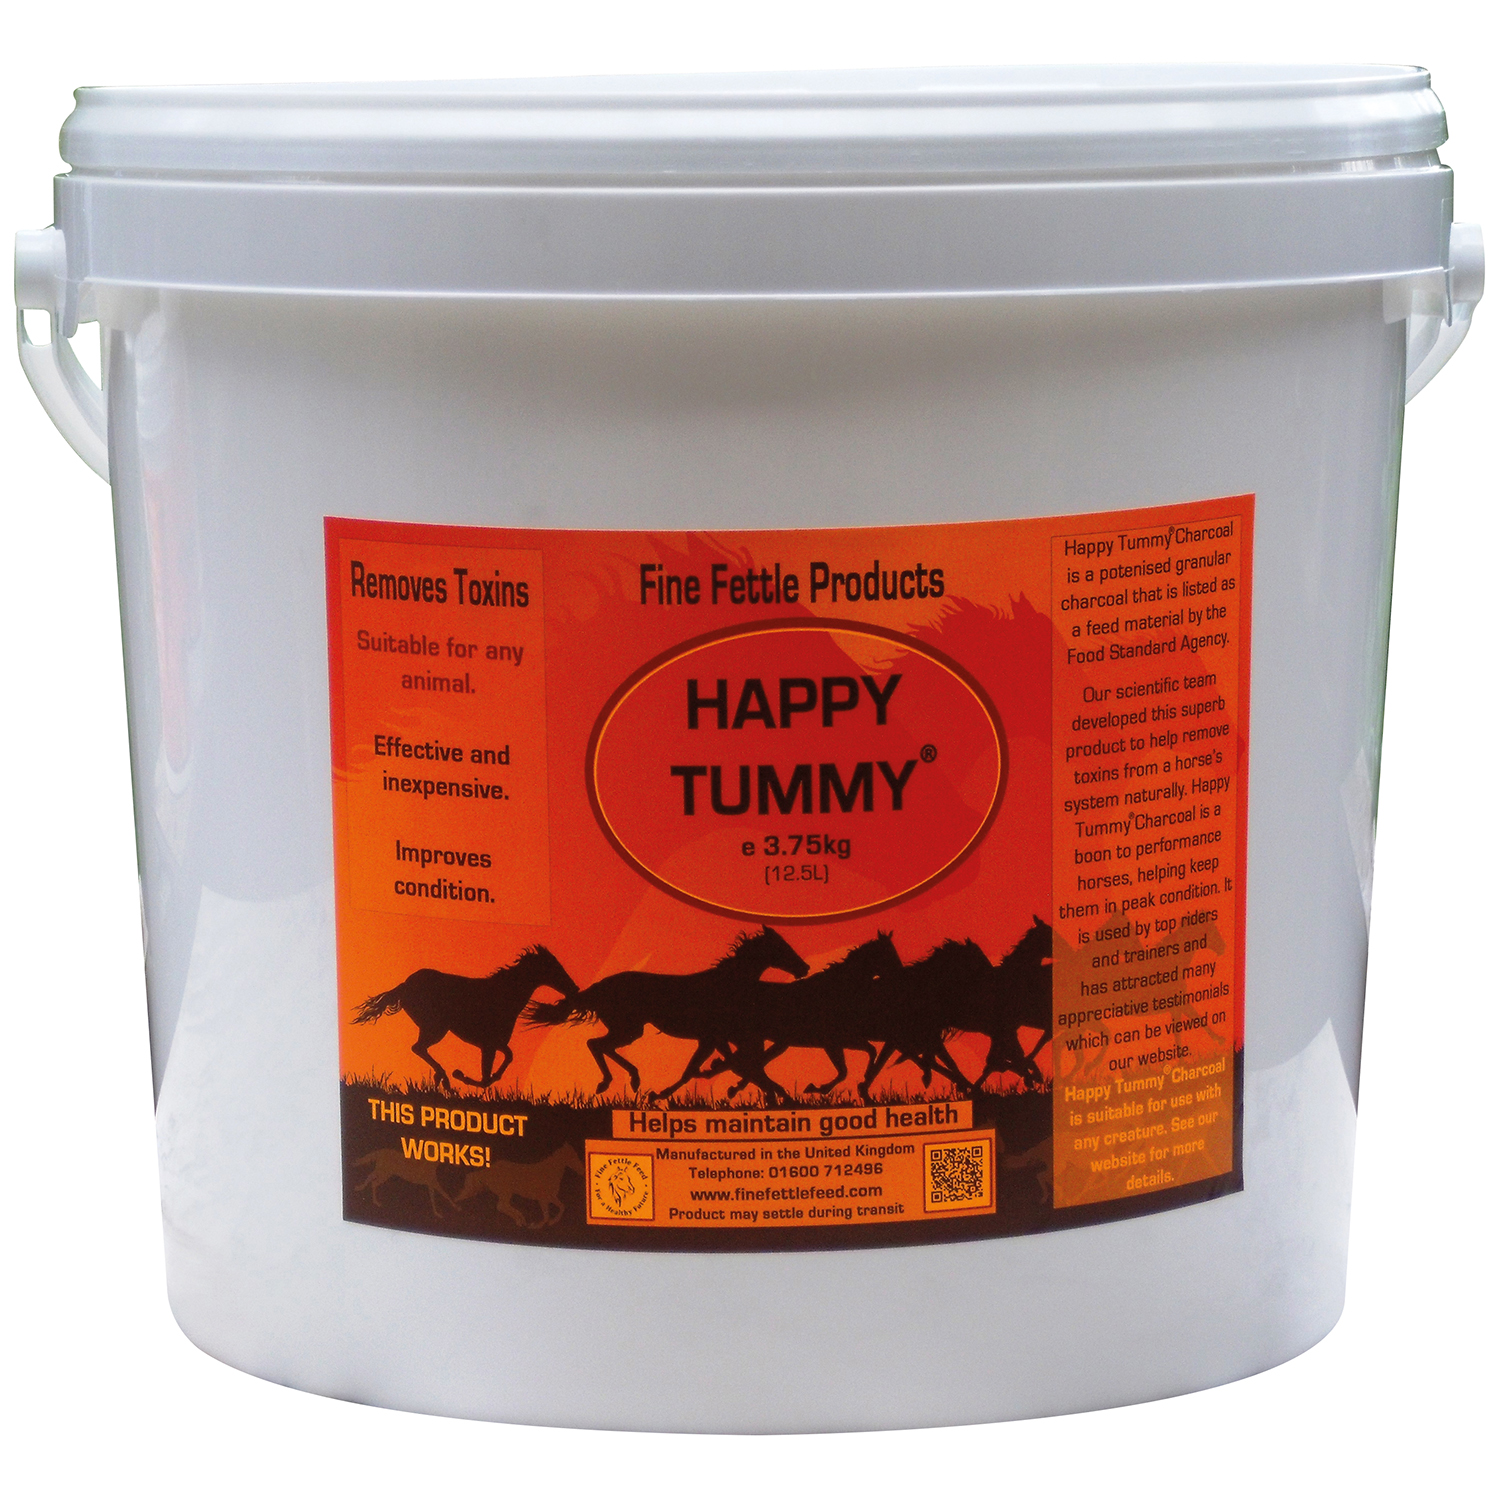 FINE FETTLE PRODUCTS HAPPY TUMMY 3.75 KG 3.75 KG